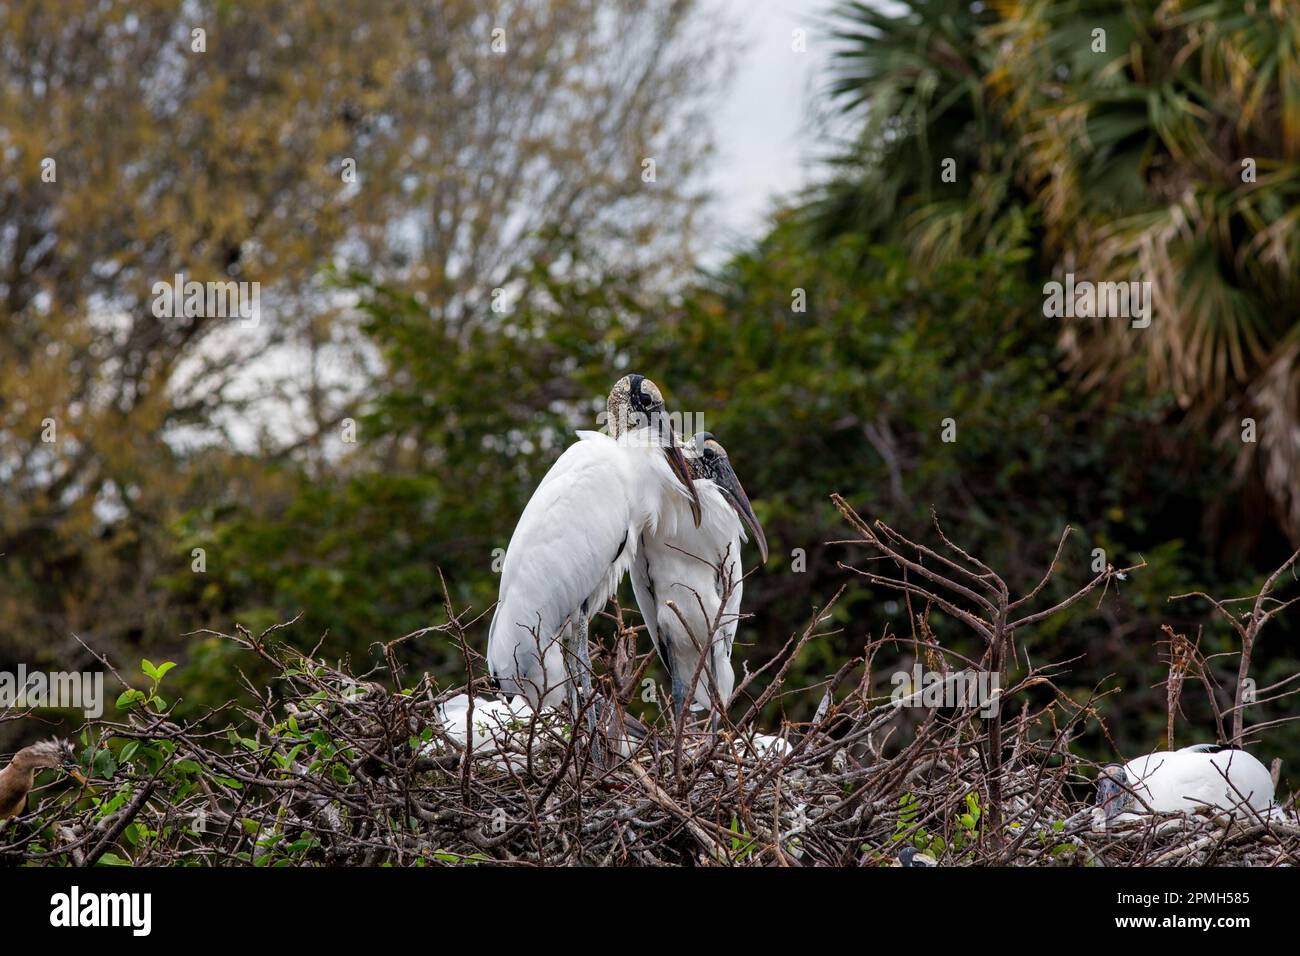 Woodstork pair in nesting colony against a backdrop of cypress and sabal palms in Florida wetland Stock Photo